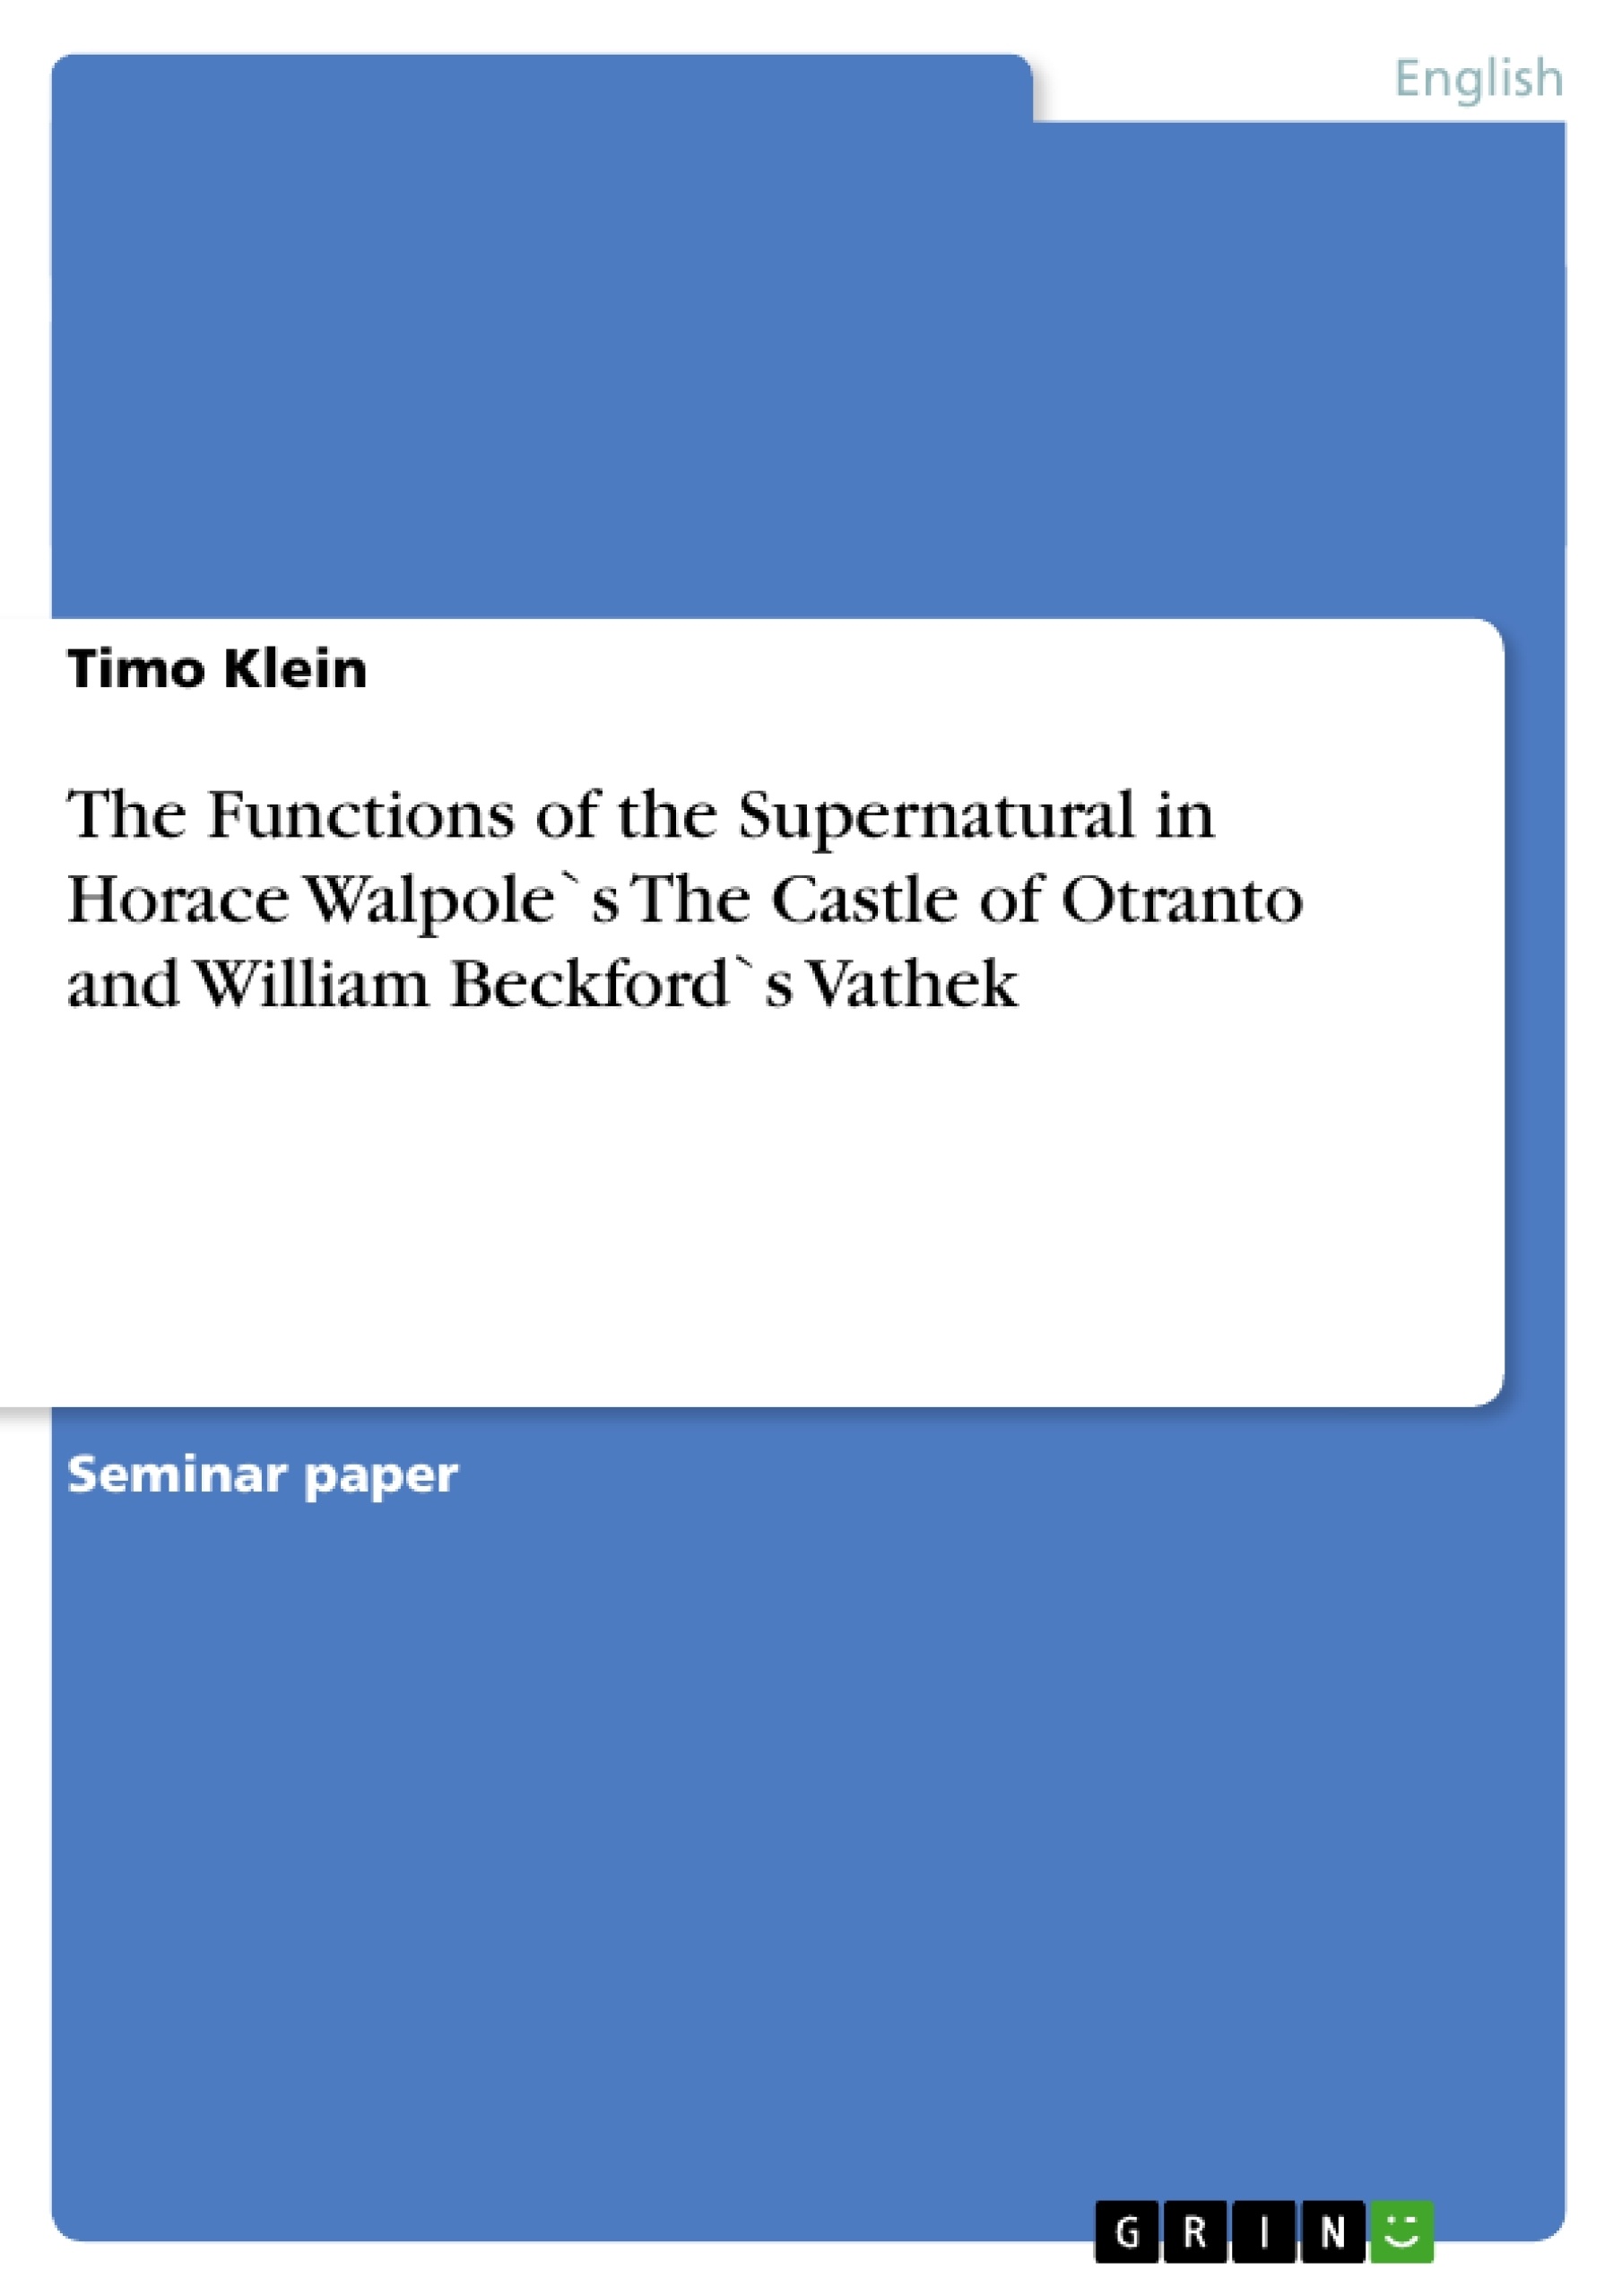 Título: The Functions of the Supernatural in Horace Walpole`s The Castle of Otranto and William Beckford`s Vathek